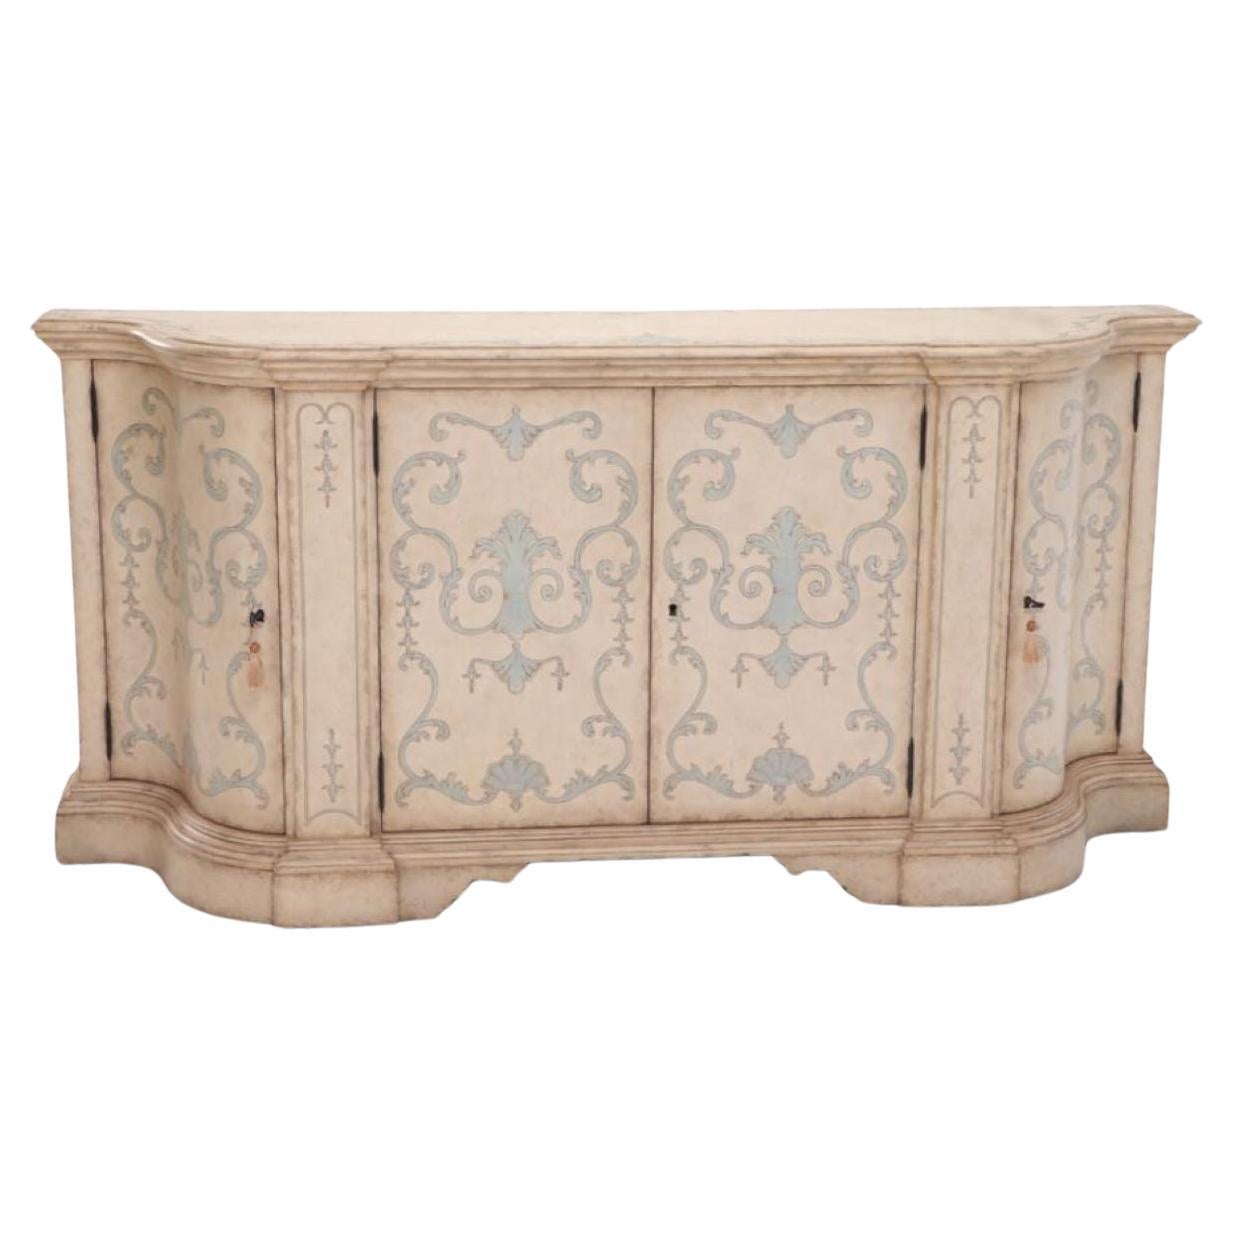 Theodre Alexander Venetion style painted sideboard or credenza